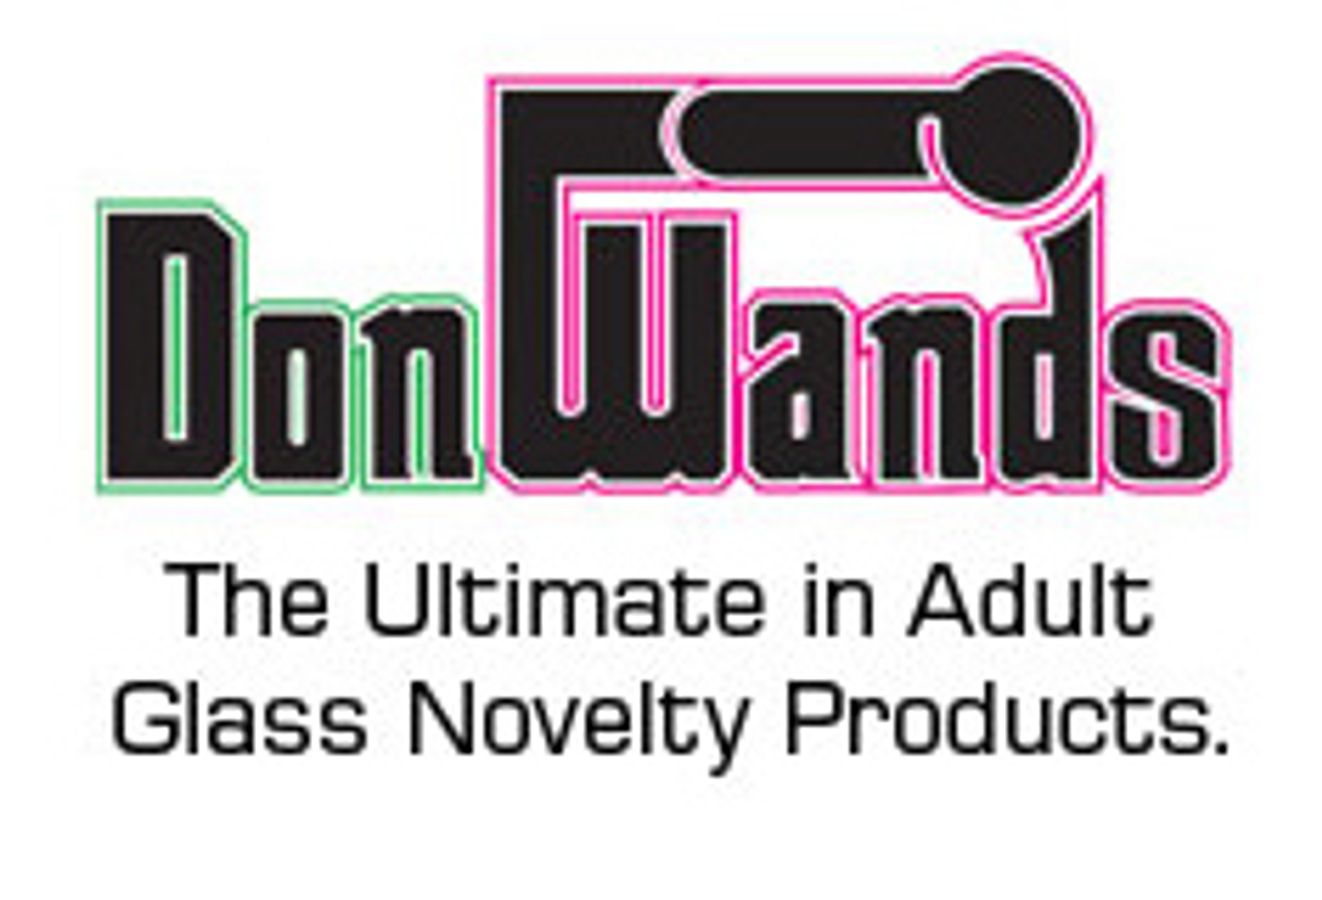 Don Wands